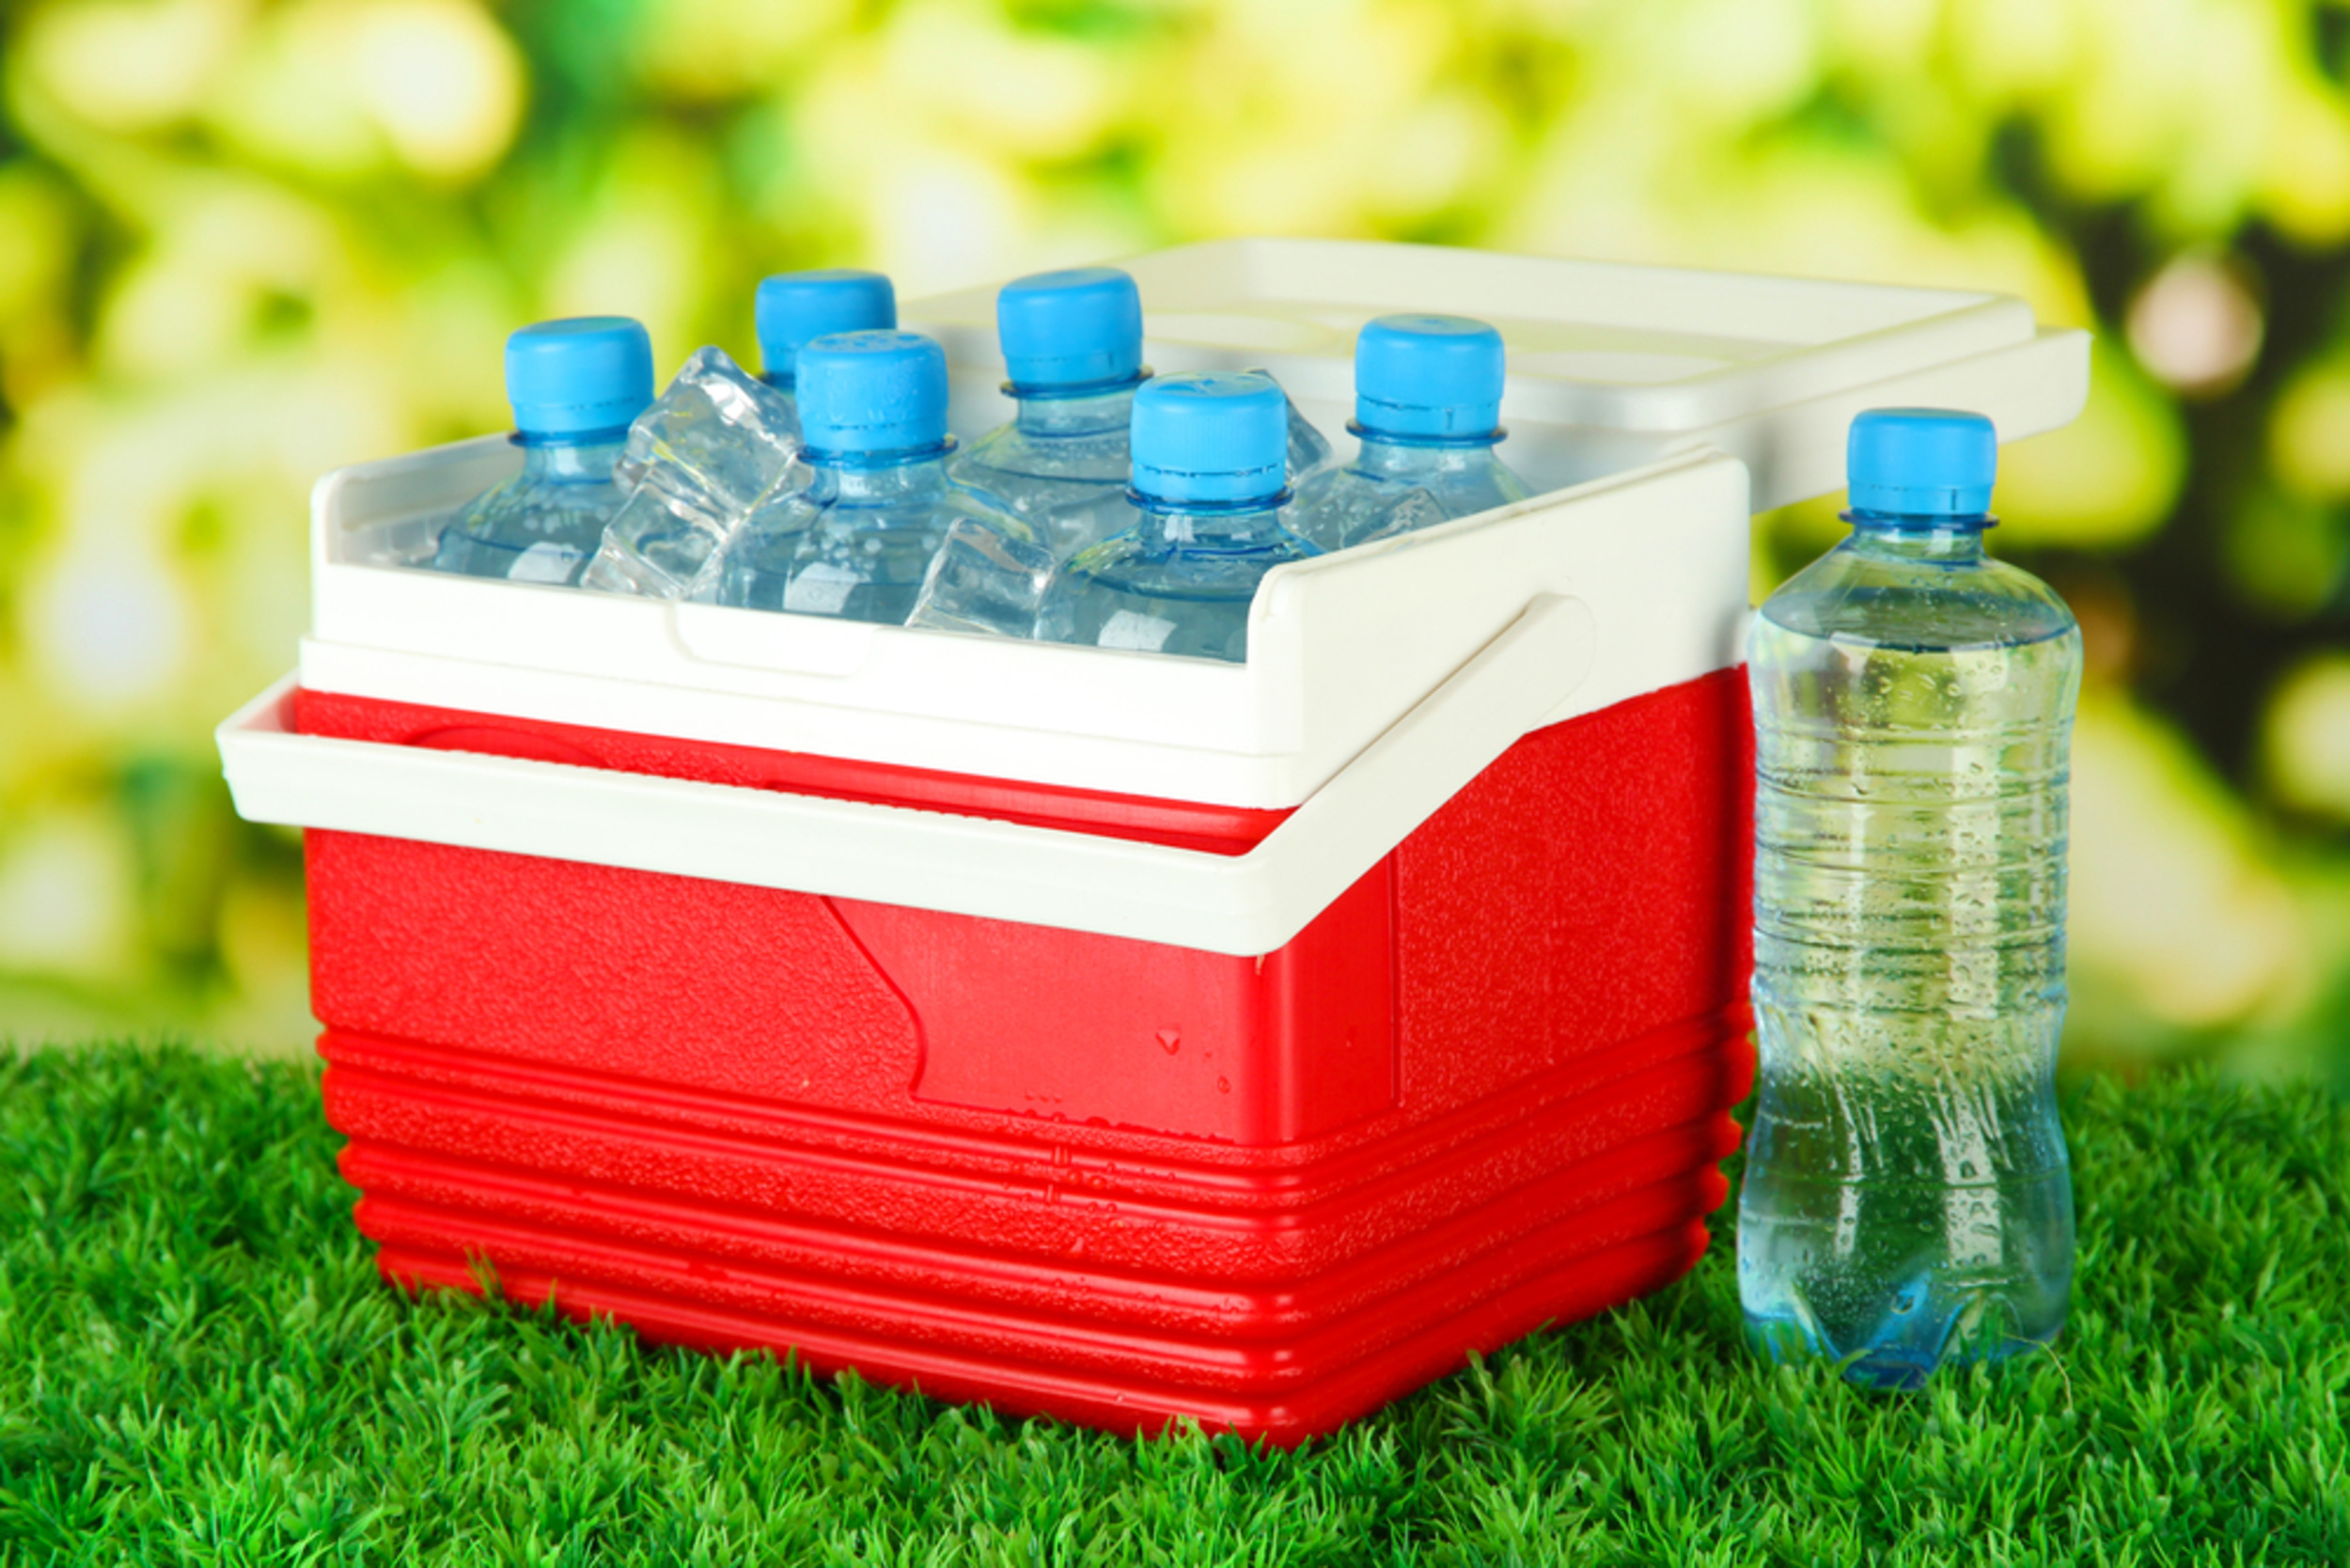 <p>Even if it's just a tiny cooler, having chilled drinks and a space to store snacks that aren't shelf-stable can be invaluable on a road trip. Tuck it behind the front seat, or store it in the trunk to encourage the occasional pit stop. </p><p>You may also like: <a href='https://www.yardbarker.com/lifestyle/articles/25_game_day_snacks_you_can_make_in_a_slow_cooker/s1__22916233'>25 game day snacks you can make in a slow cooker</a></p>